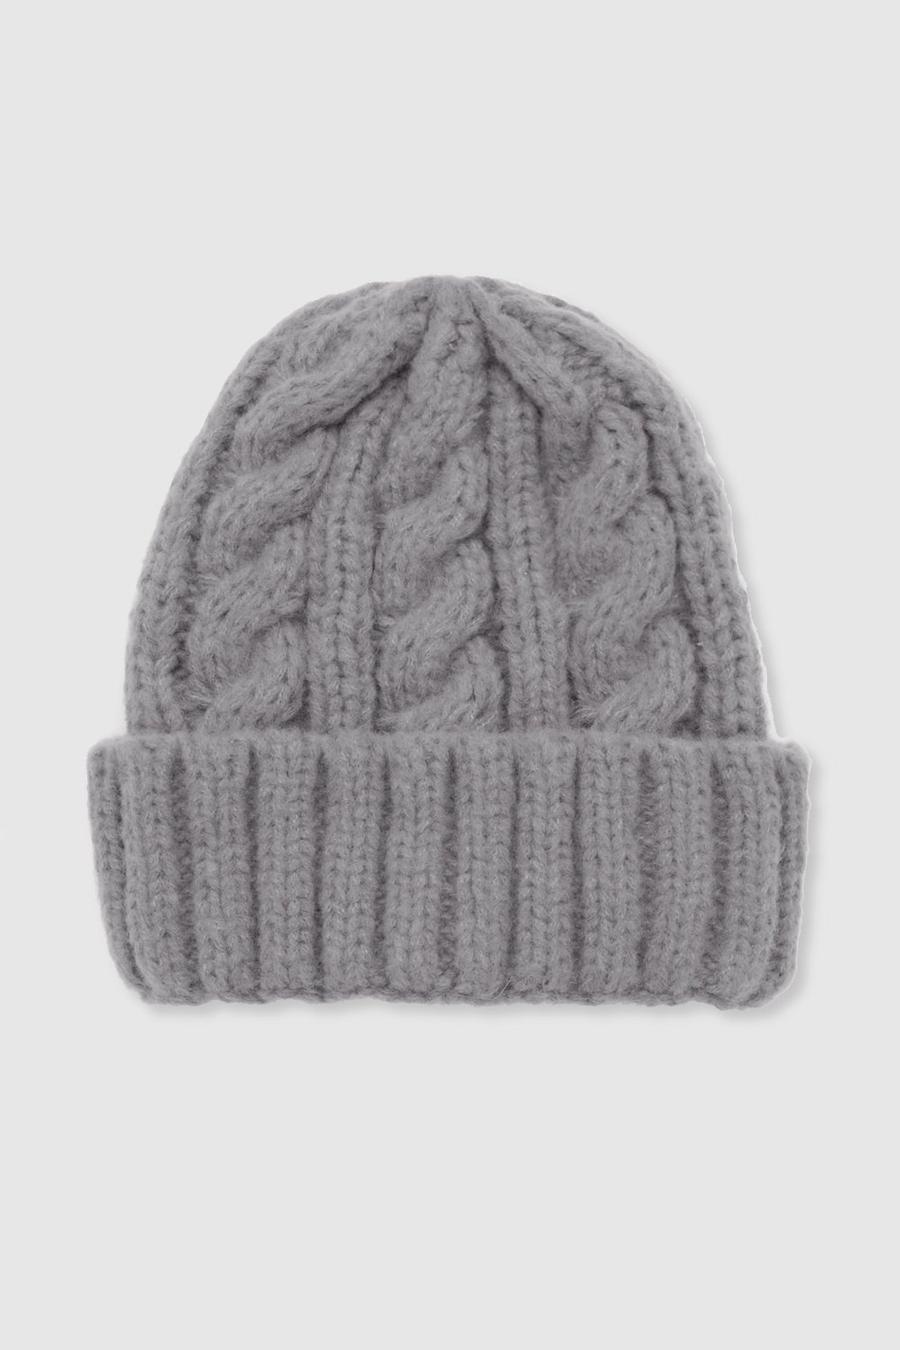 Chunky Grey Cable Knit Beanie 